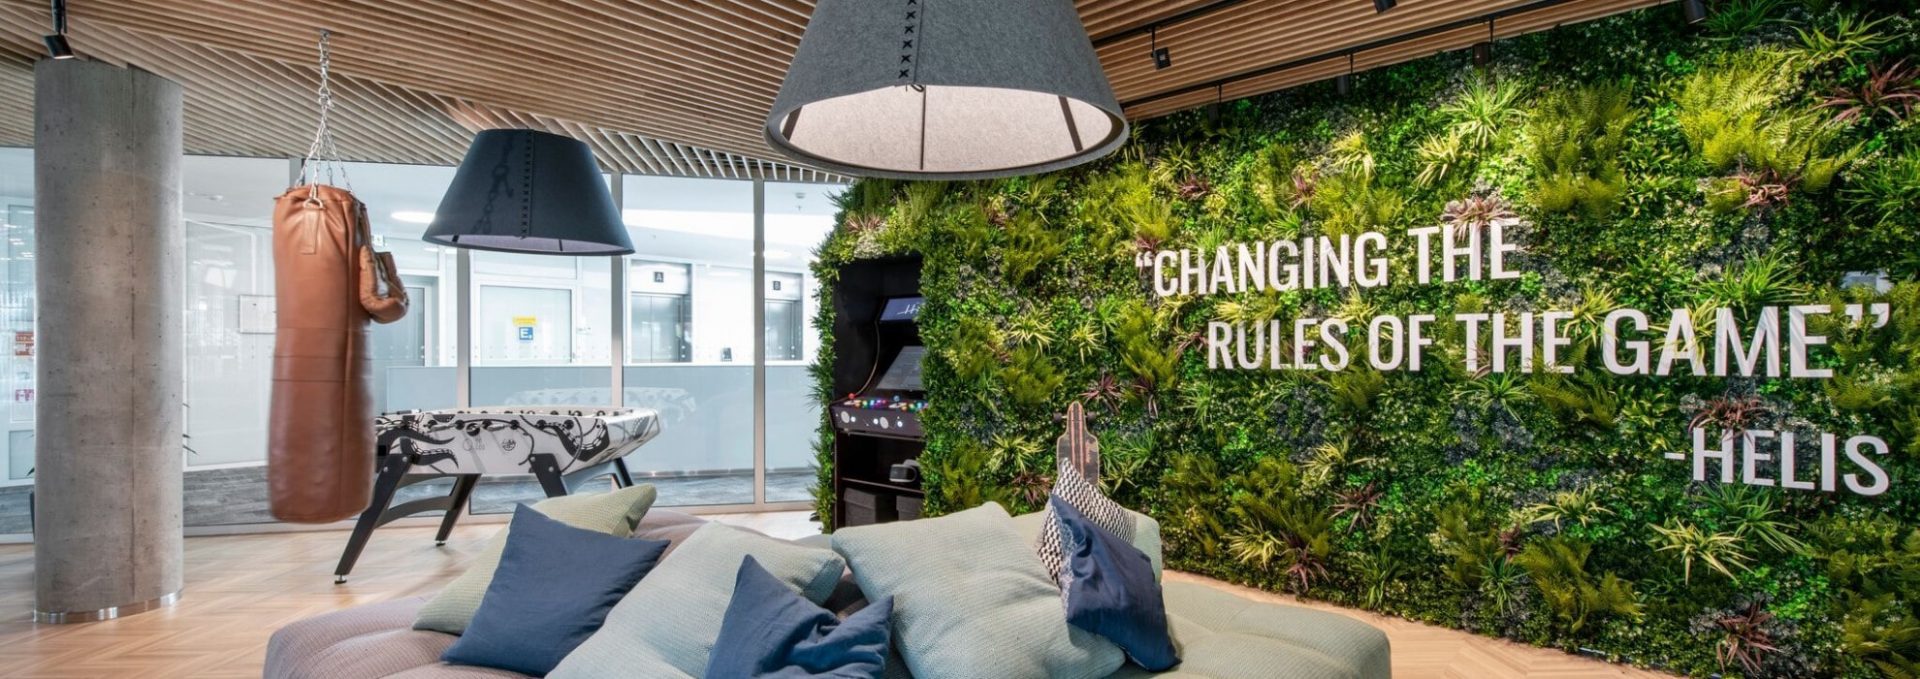 Workplace Wellbeing indoor living wall